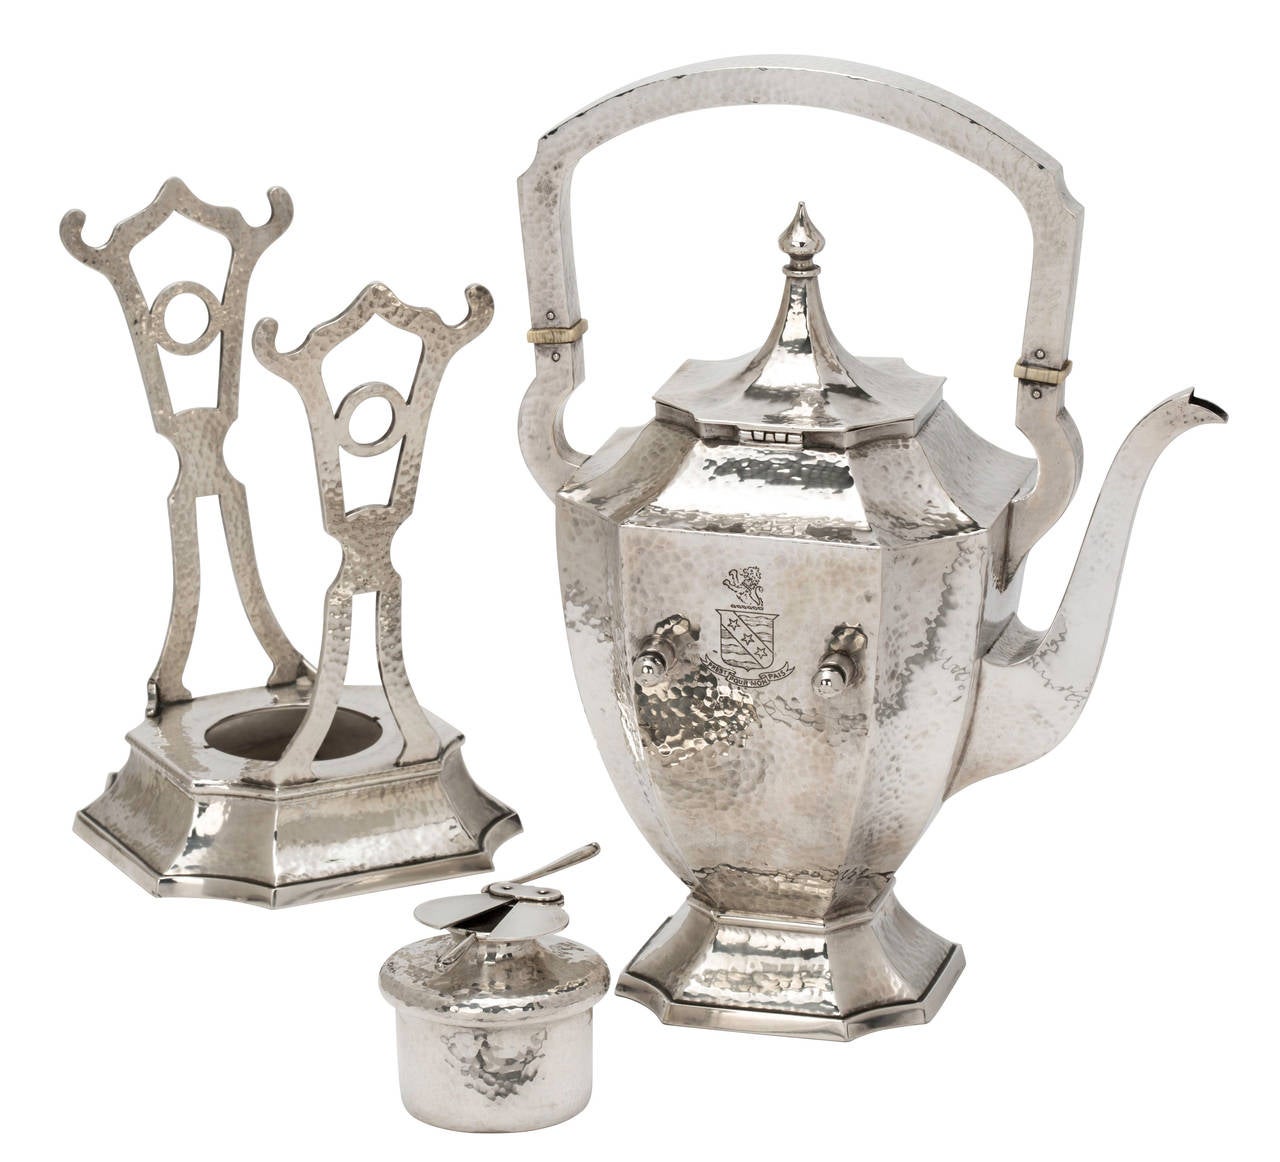 All hand-wrought, hand-hammered sterling silver spirit kettle.
Marked International sterling bsc 2600 H /8. All parts are sterling. Kettle, stand and heating bowl with strainer.
49 regular oz.